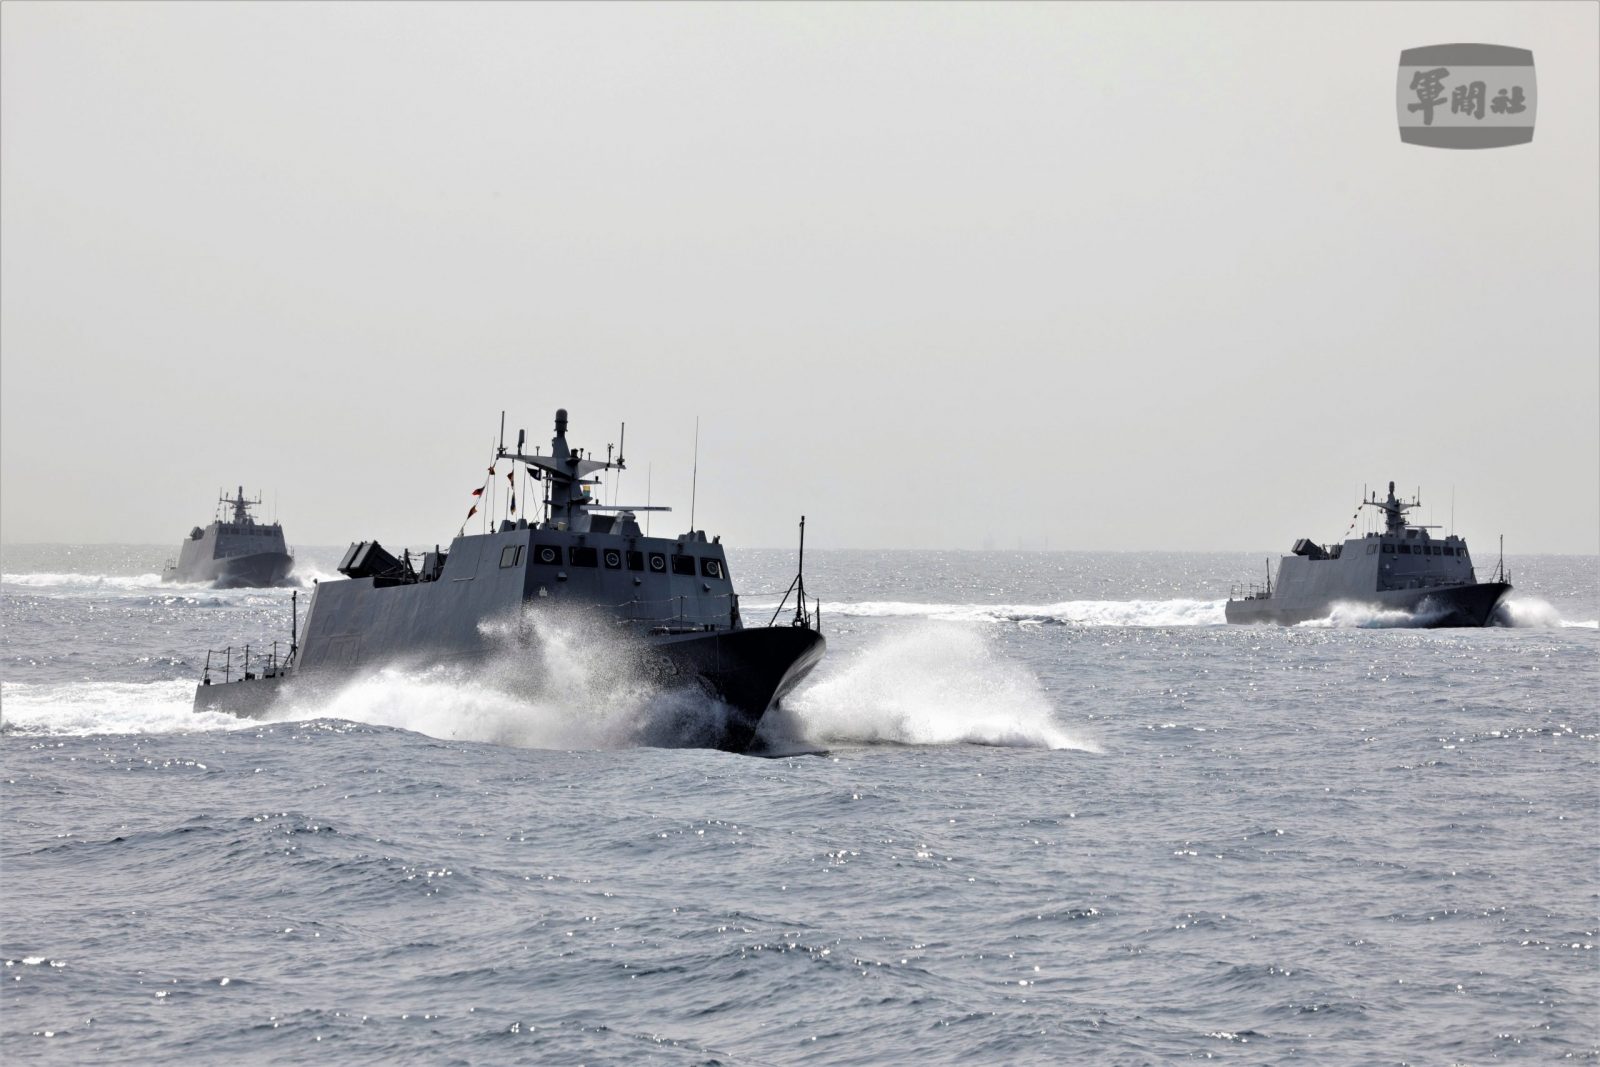 epa10567155 A handout photo provided by the Taiwan Ministry of National Defense shows Taiwan Navy vessels FACG (Fast Attack Craft, Guided missile) sail at an undisclosed location, 10 April 2023. The People's Liberation Army (PLA) is holding a military exercise in the Fujian Province, Pingtan County, the closest point to Taiwan after China announced three days of military drills around Taiwan on 09 April.  EPA/HOTLI SIMANJUNTAK HANDOUT -- MANDATORY CREDIT -- the watermark may not be removed/cropped -- HANDOUT EDITORIAL USE ONLY/NO SALES